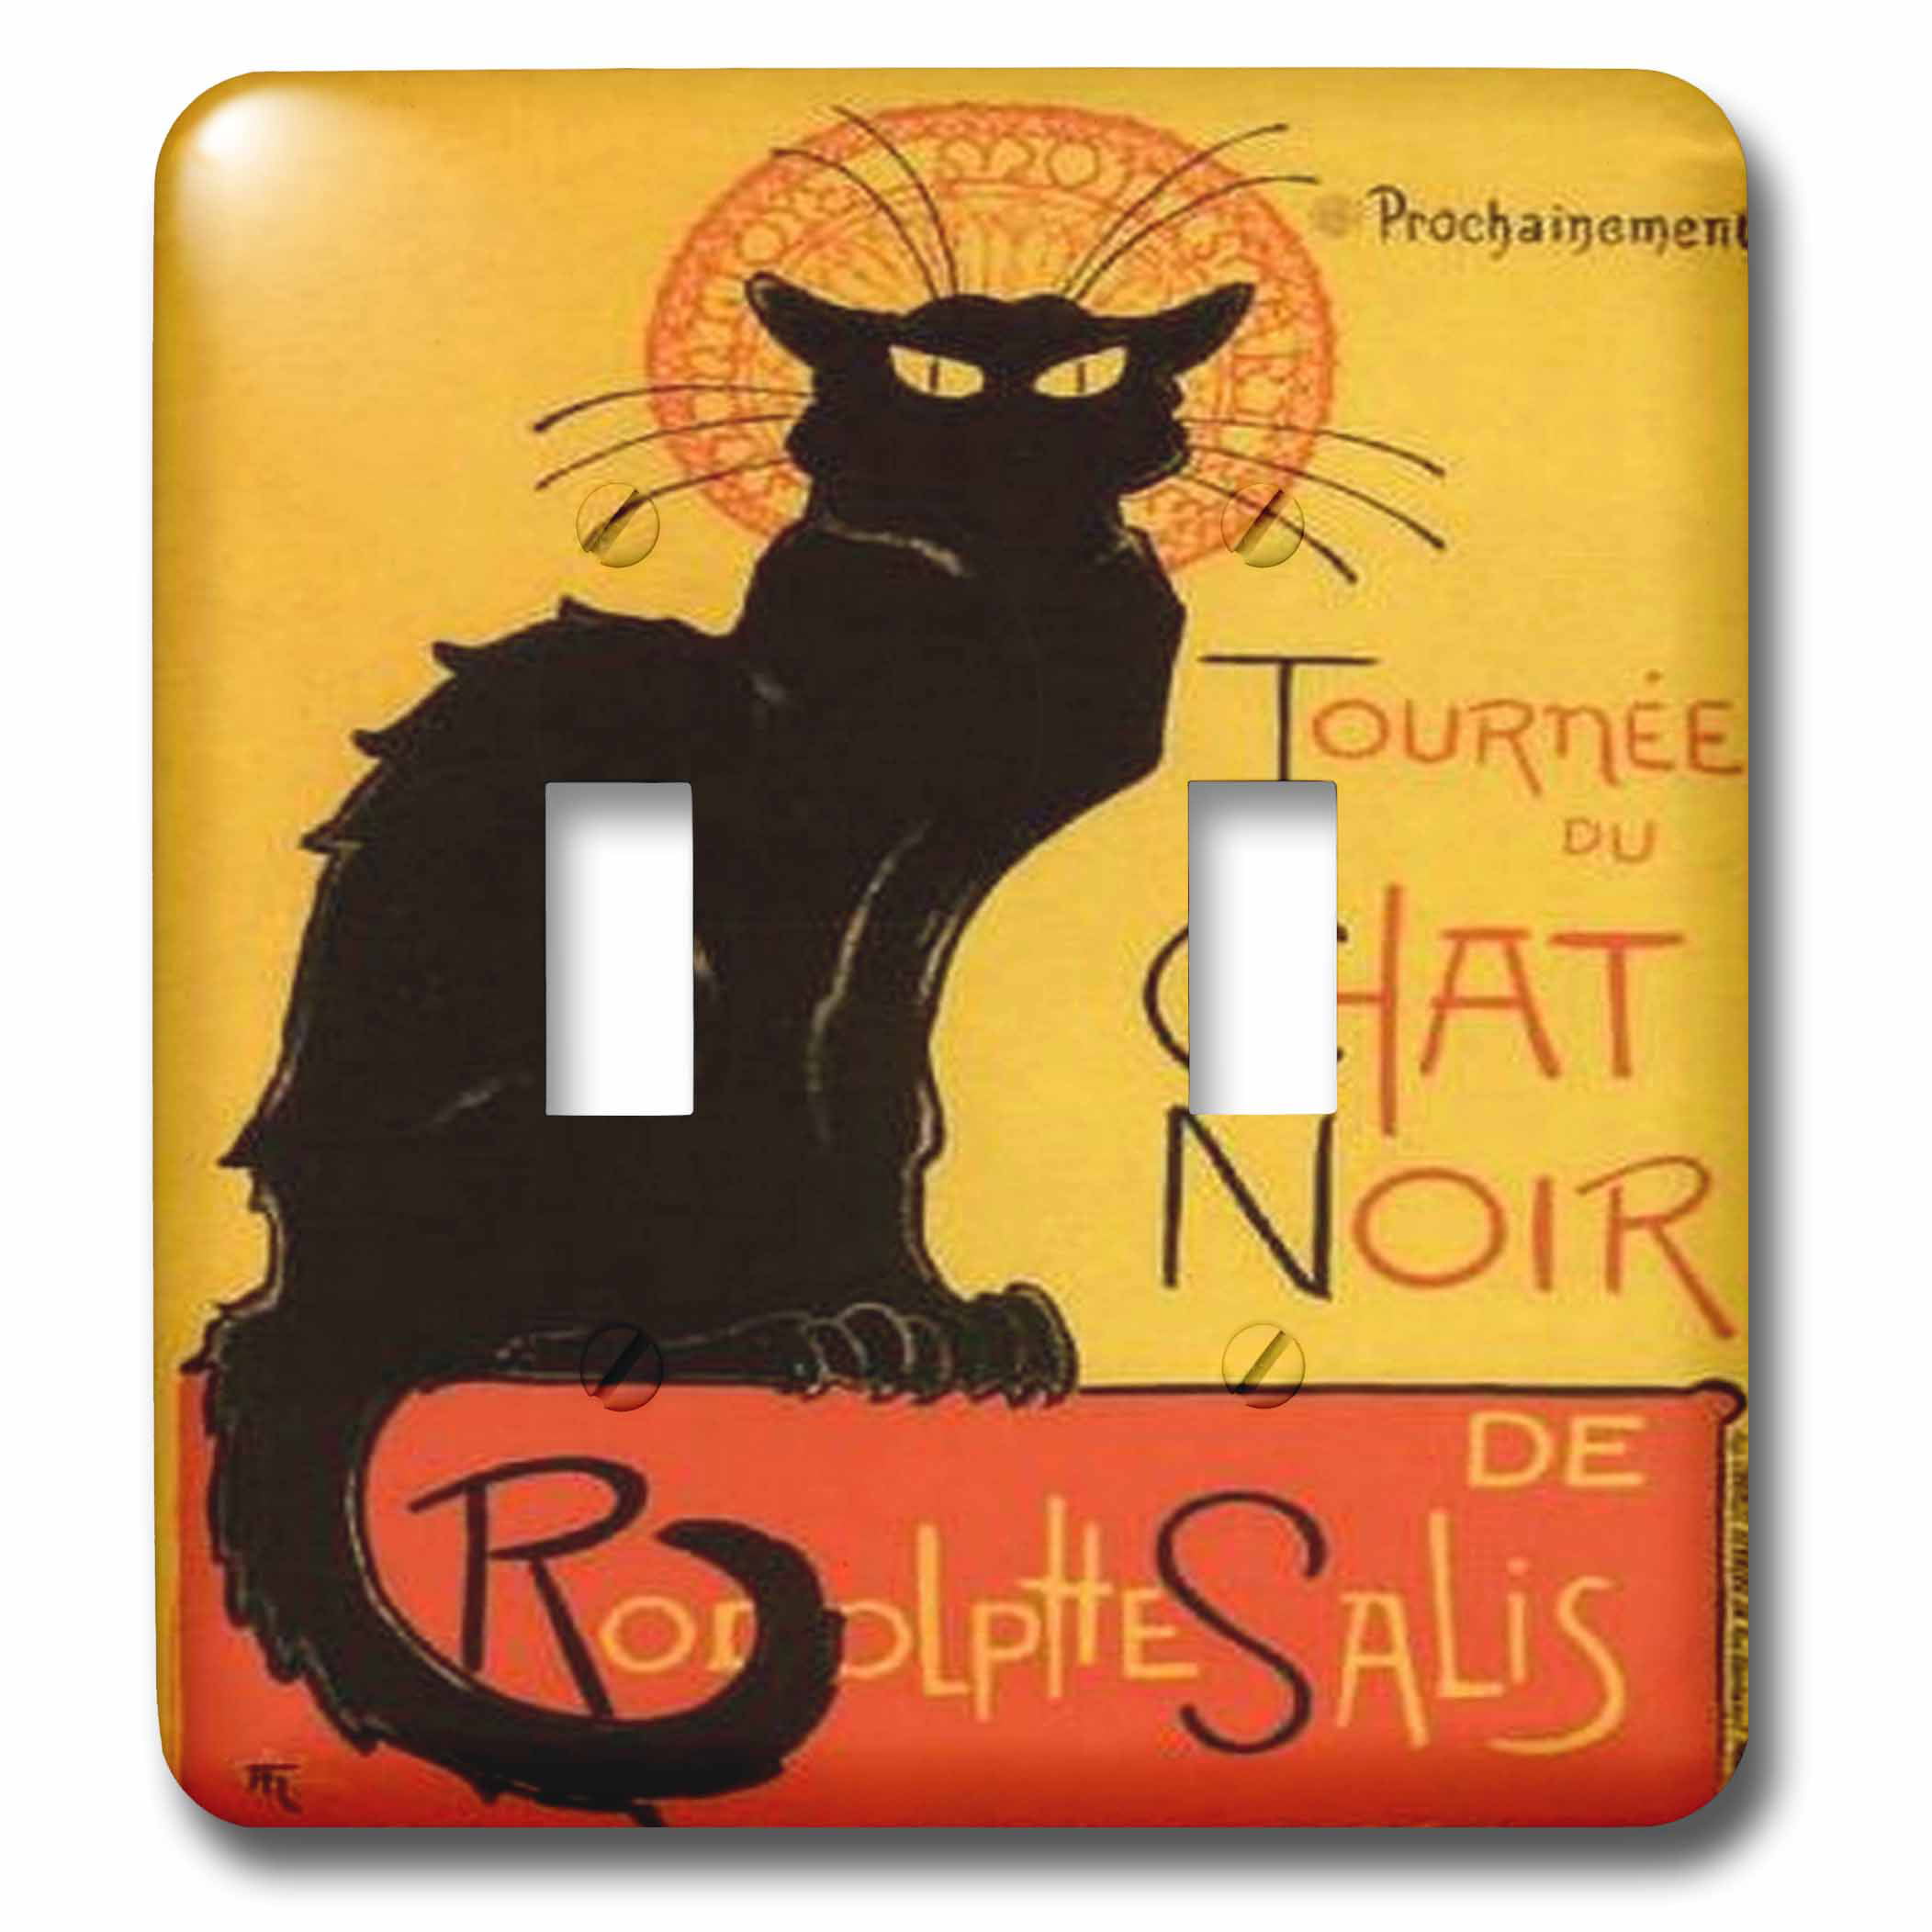 3dRose lsp_46907_1 Le Chat Noir Toggle Switch